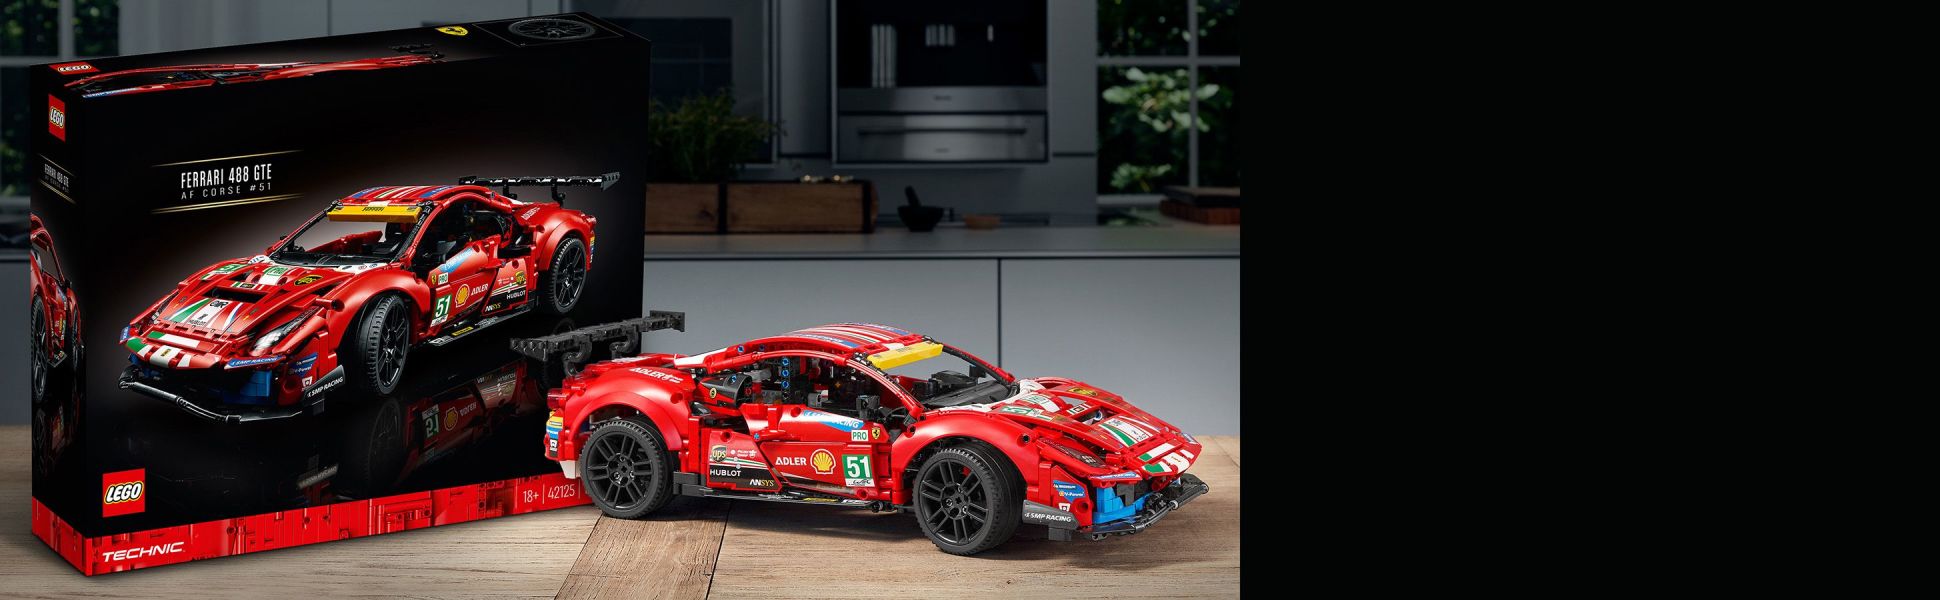 LEGO Technic Ferrari 488 GTE “AF Corse #51” 42125 - Champion GT Series  Sports Race Car, Exclusive Collectible Model Kit, Collectors Set for Adults  to